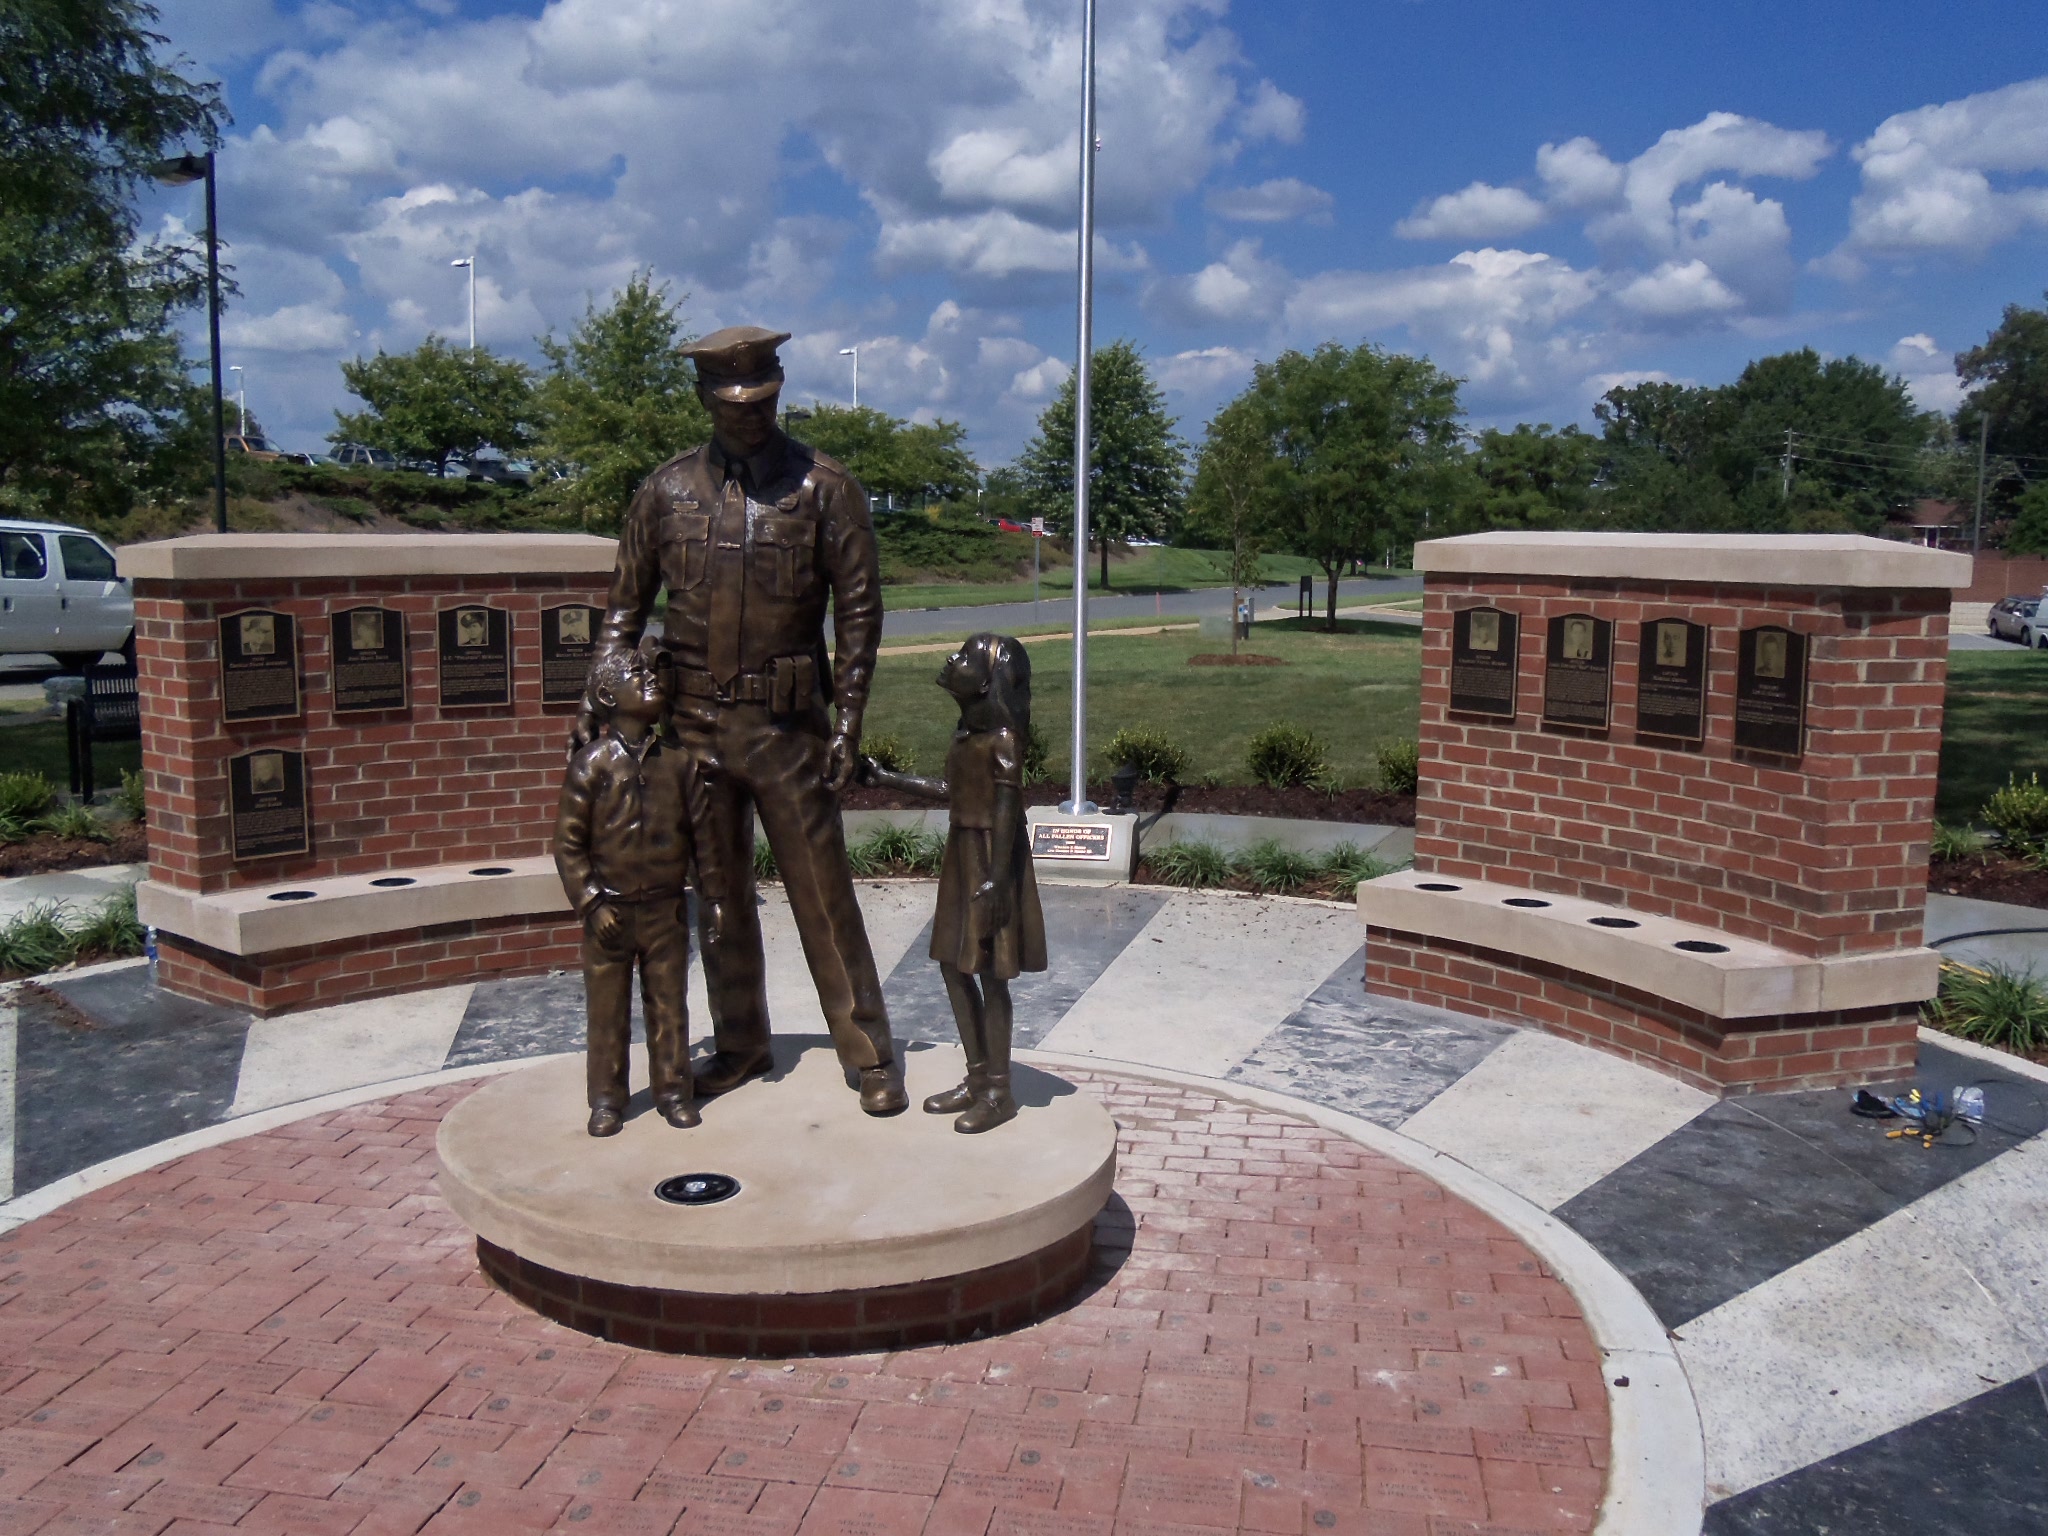 Protector statue with officer and child